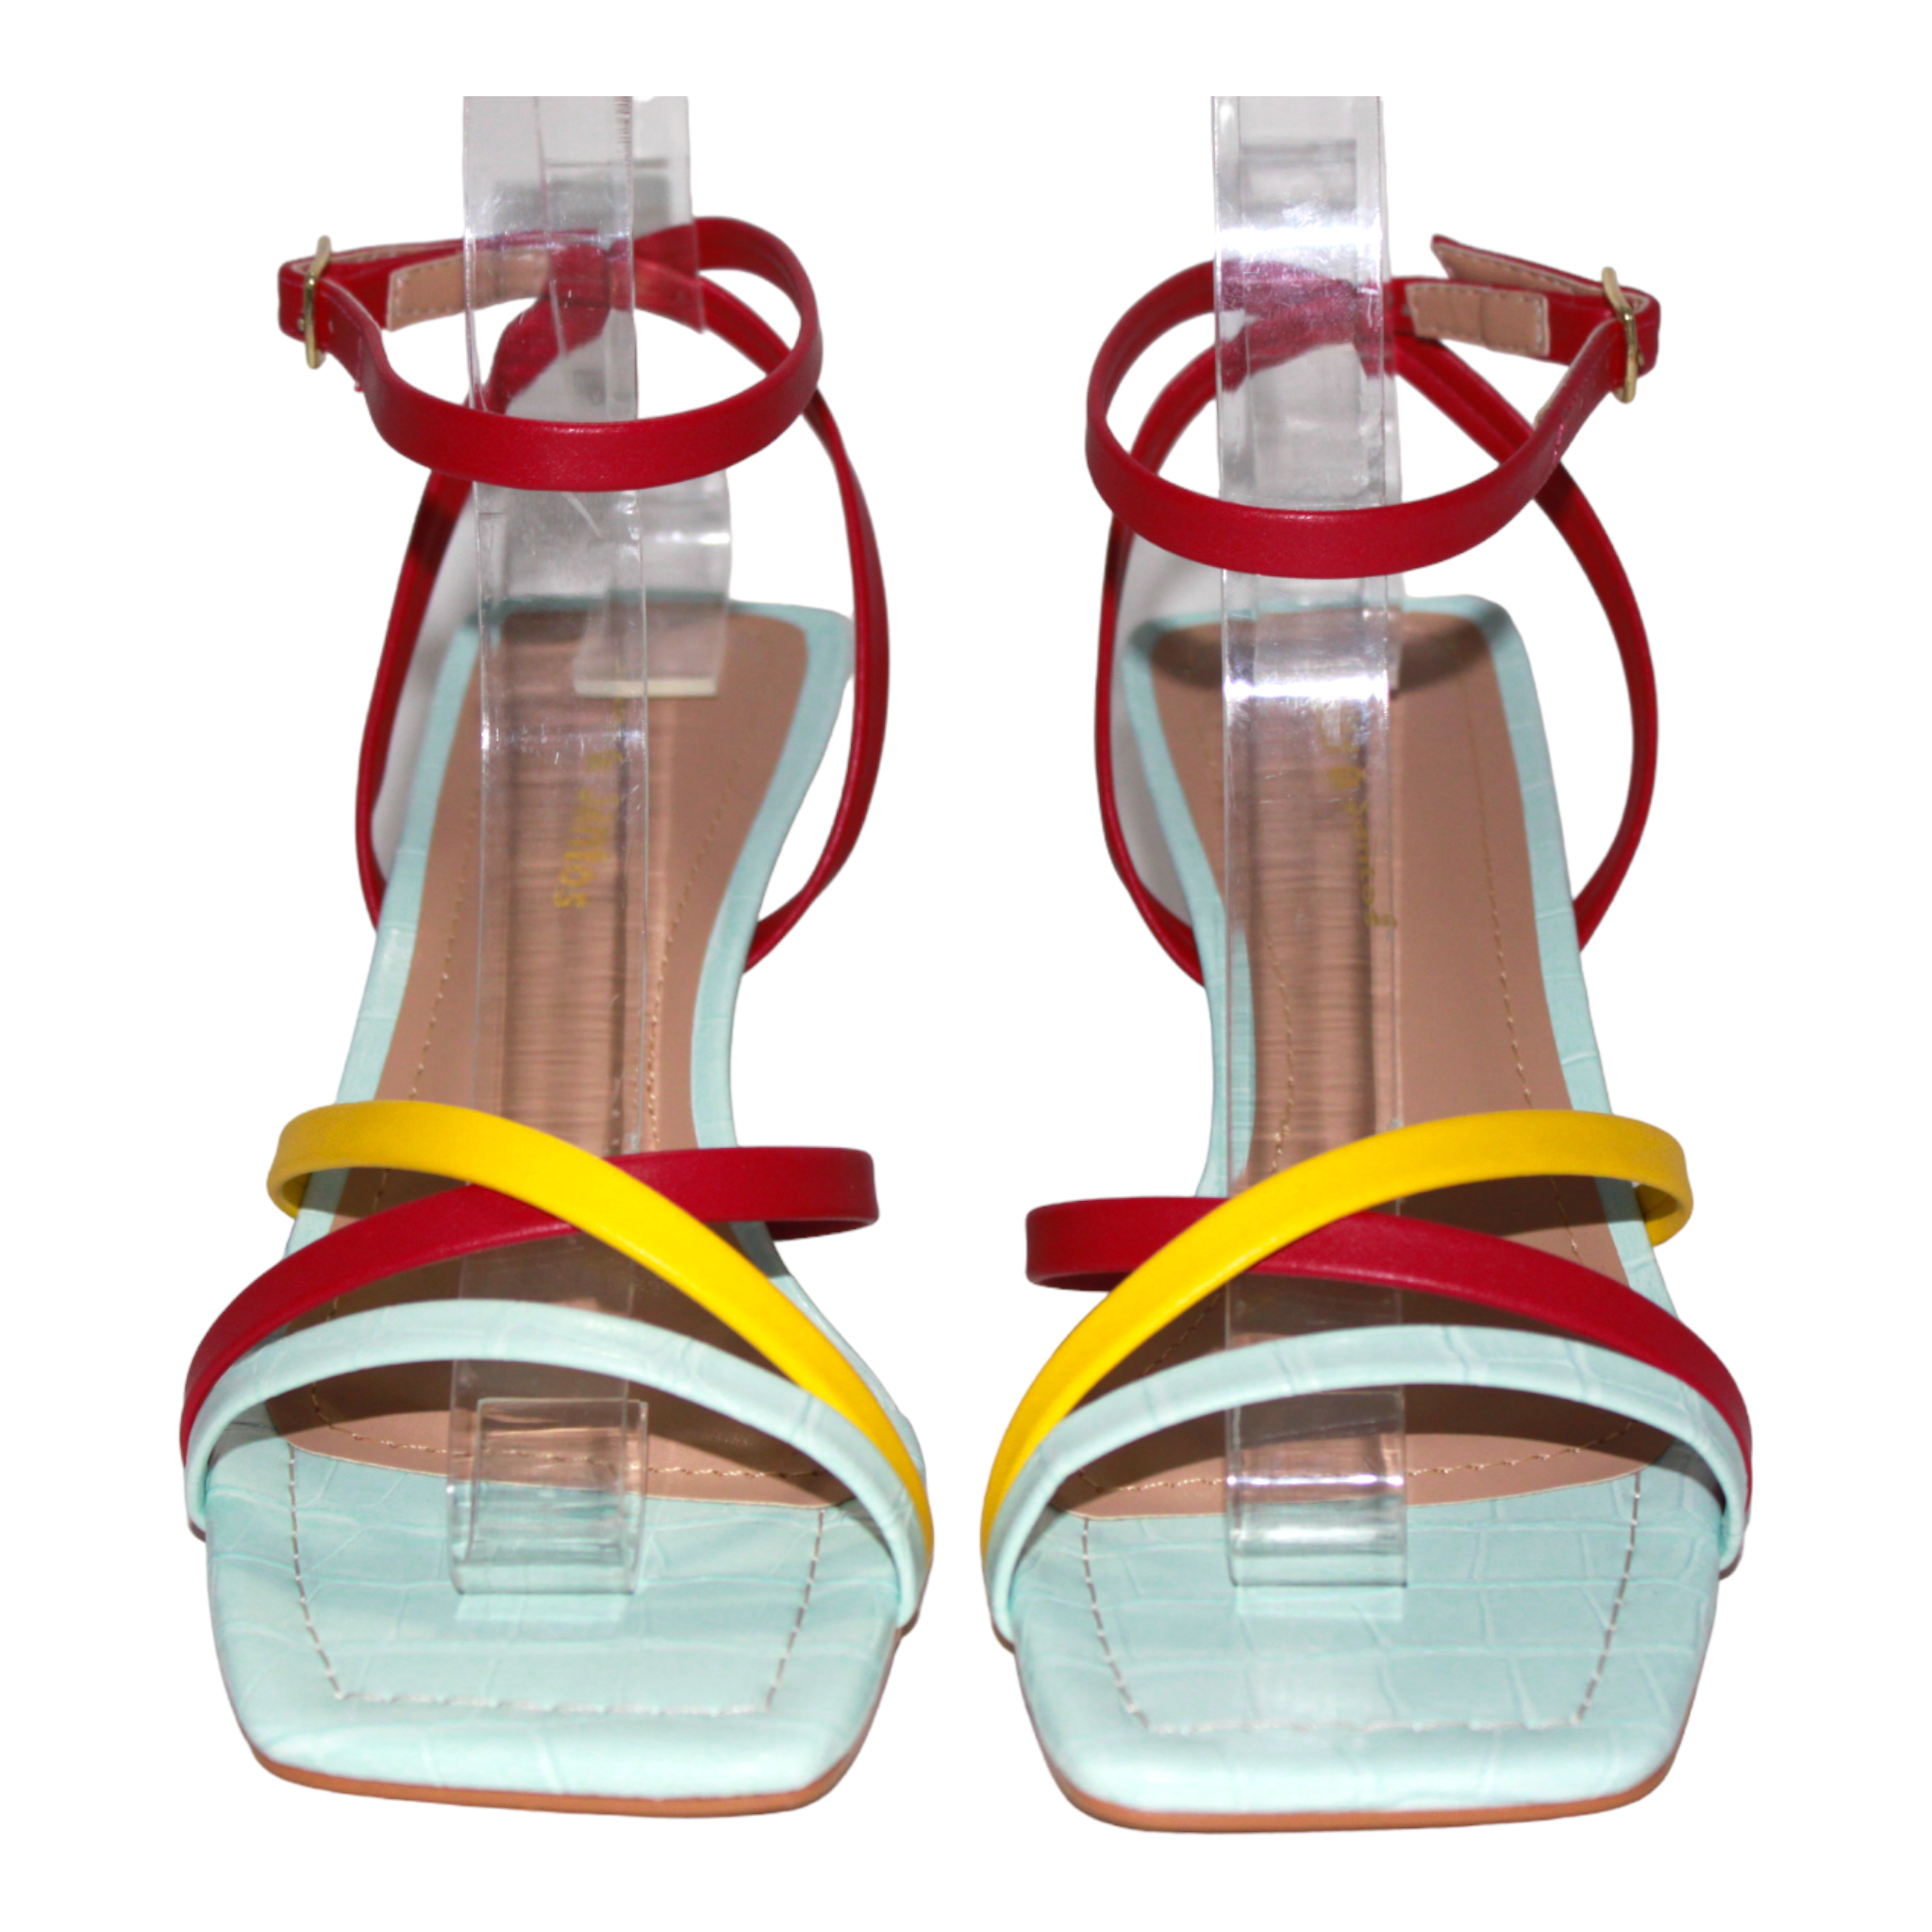 A Rainbow of Colorful Sandals With Heels. - The Stripe